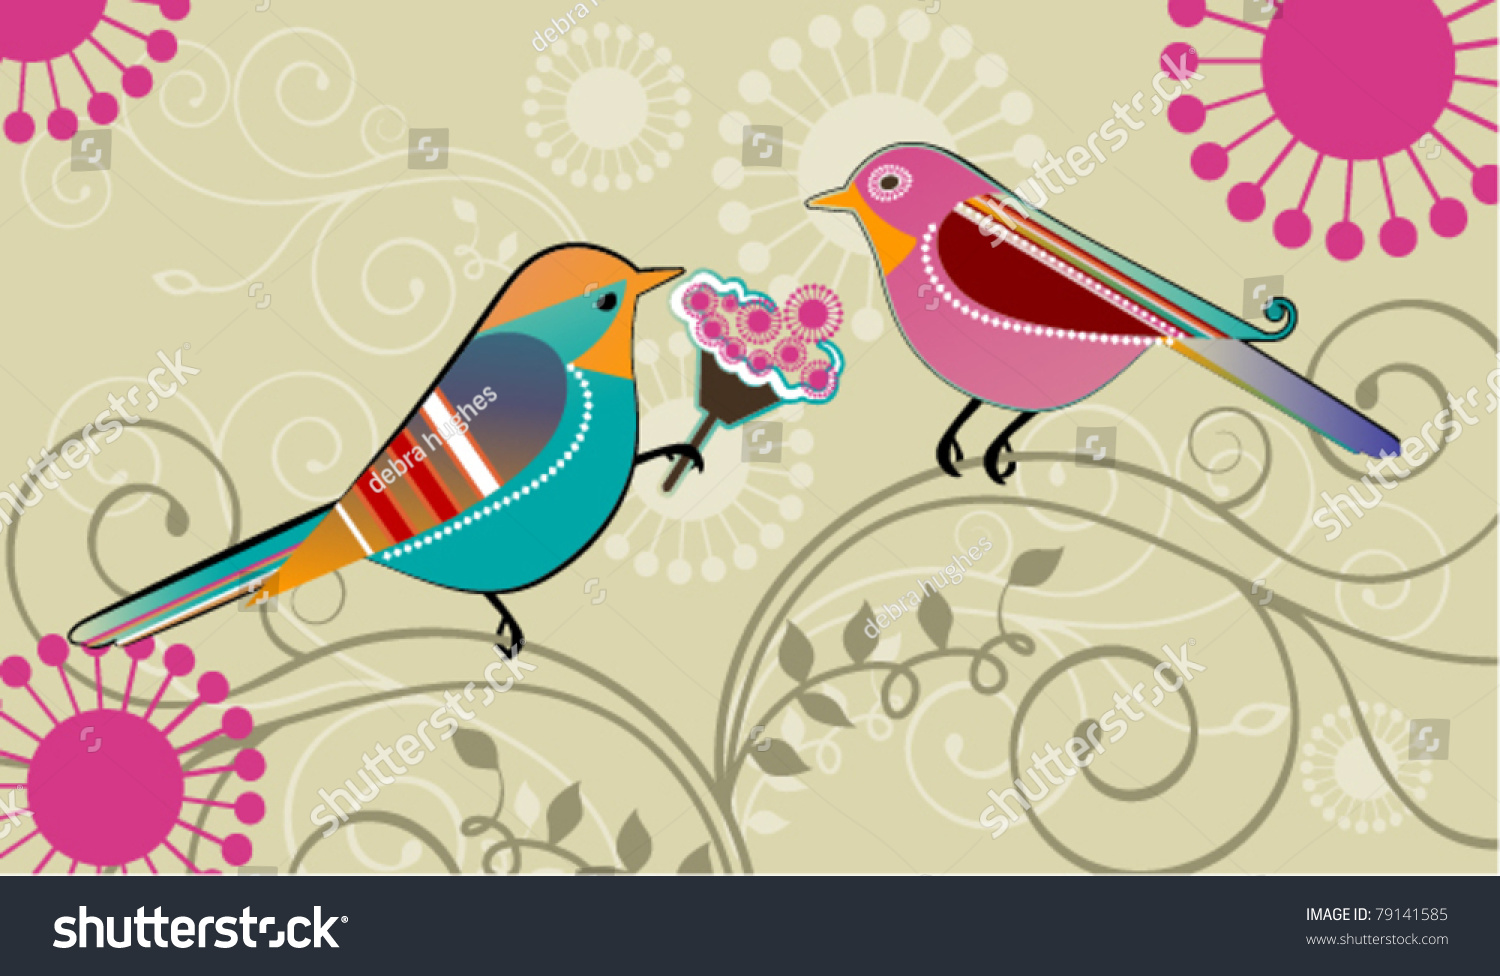 whimsical jungle clip art download - photo #34